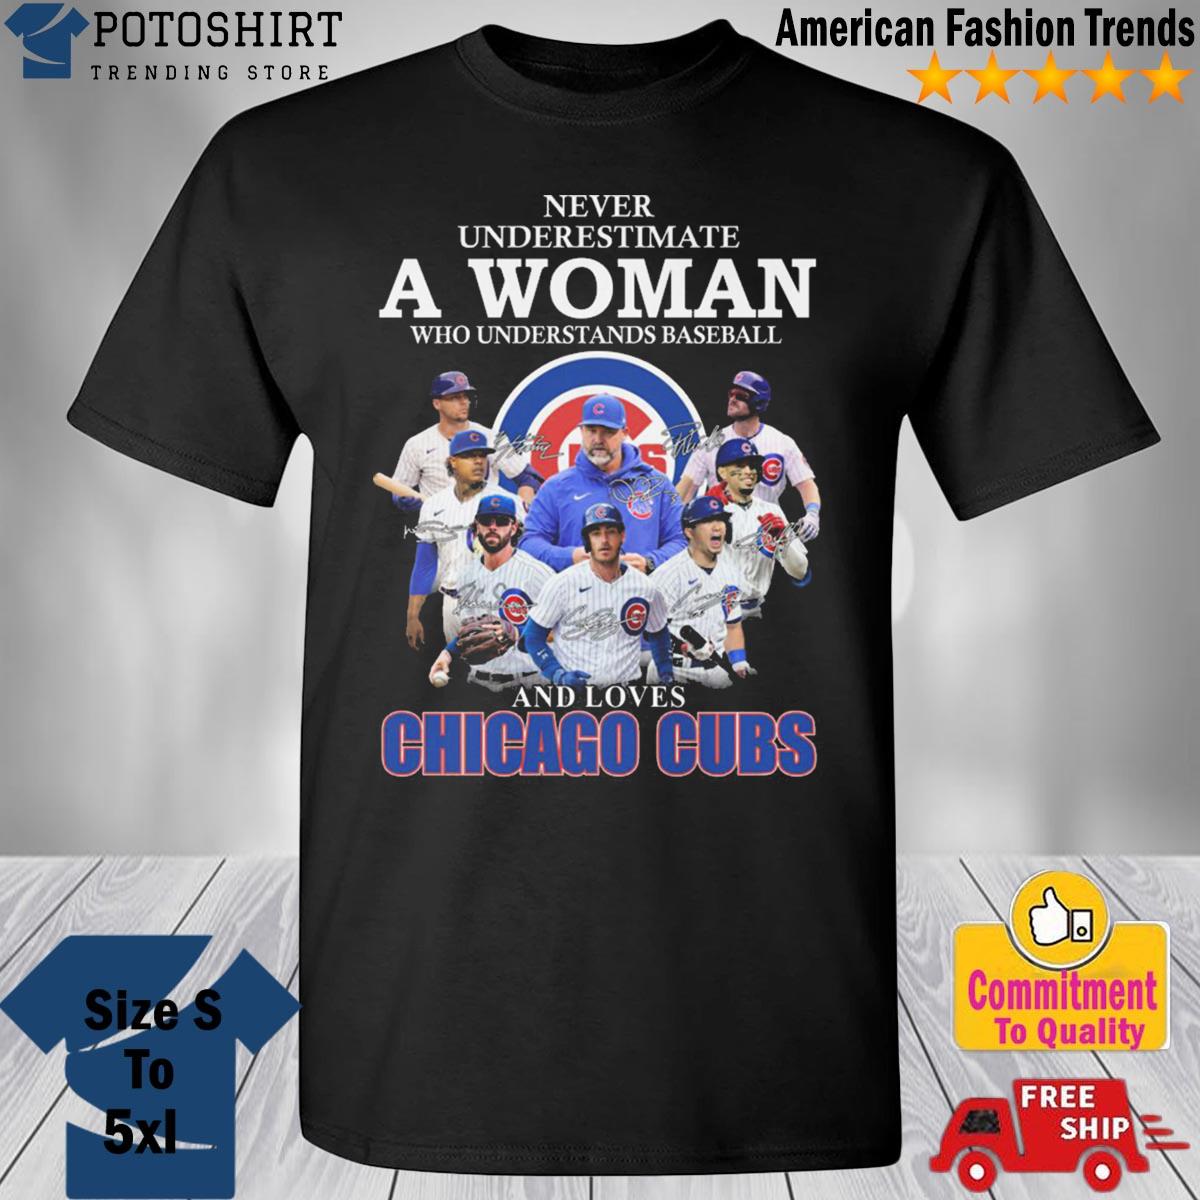 Product never Underestimate A Woman Who Understands Baseball And Loves  Chicago Cubs Shirt Hoodie Sweater, hoodie, sweater, long sleeve and tank top